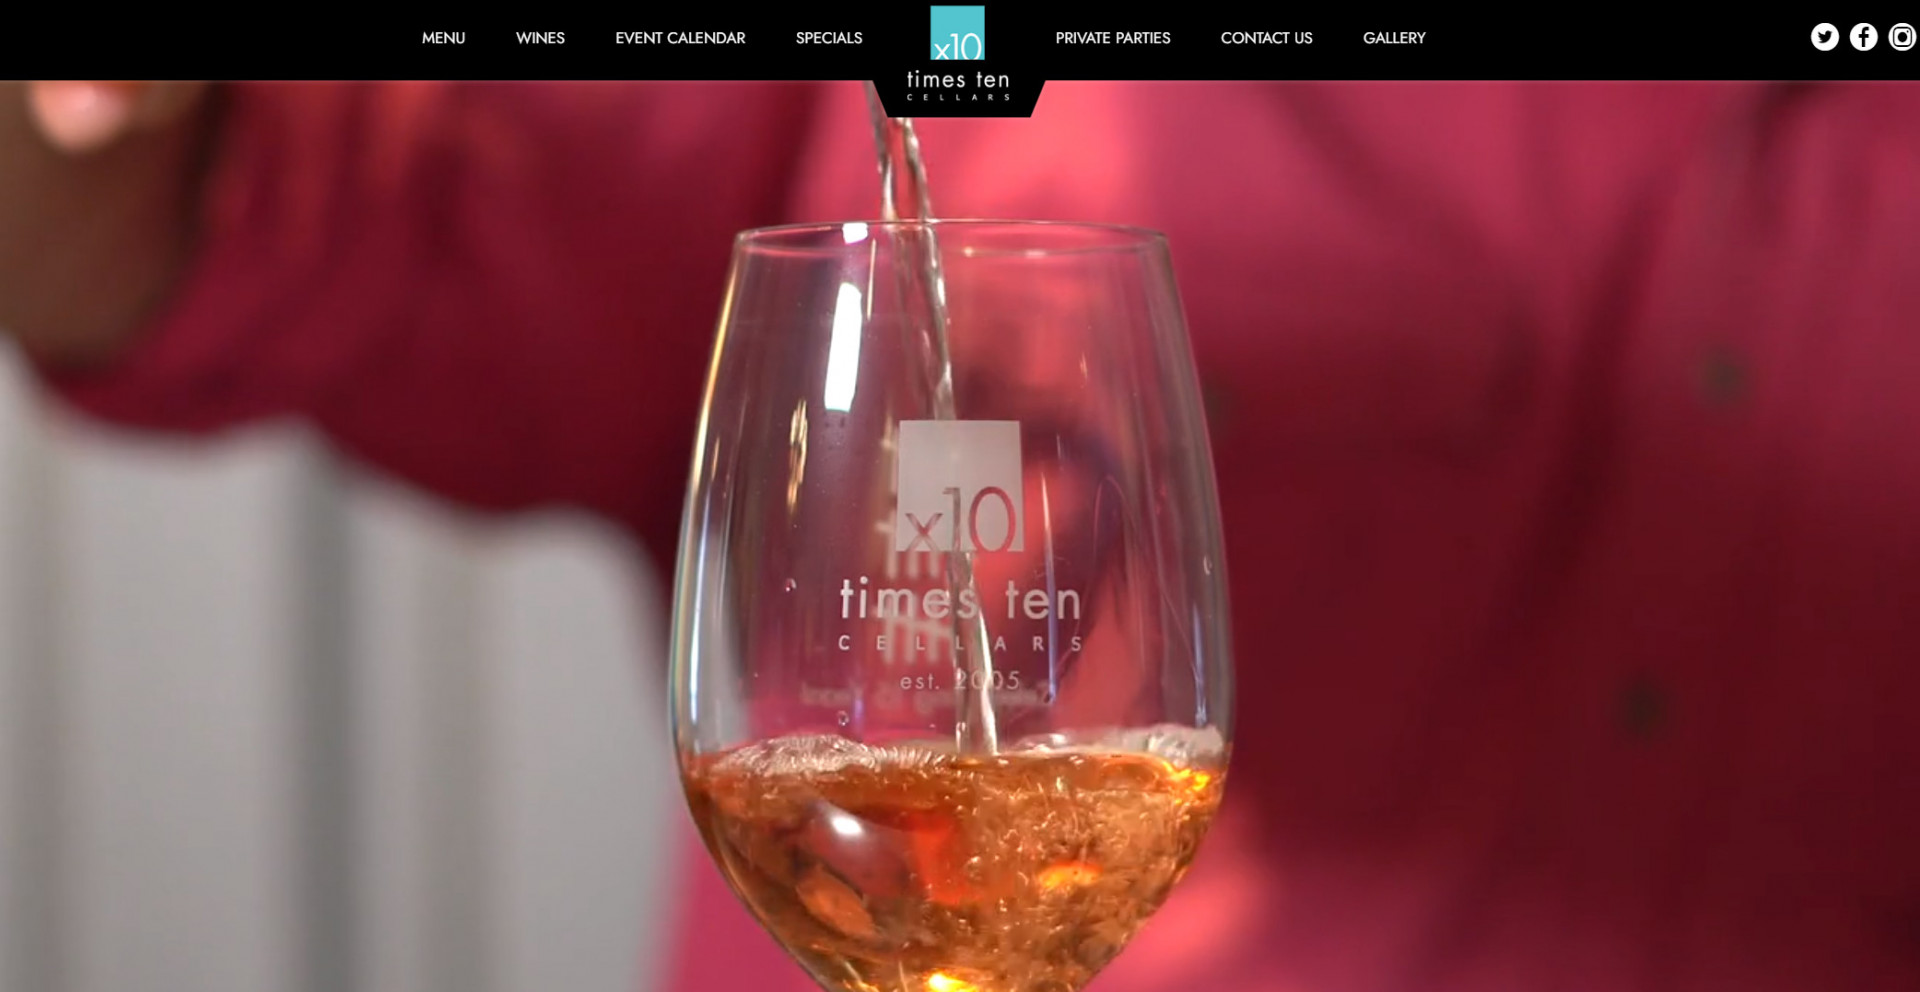 A restaurant web page example for wine tasting